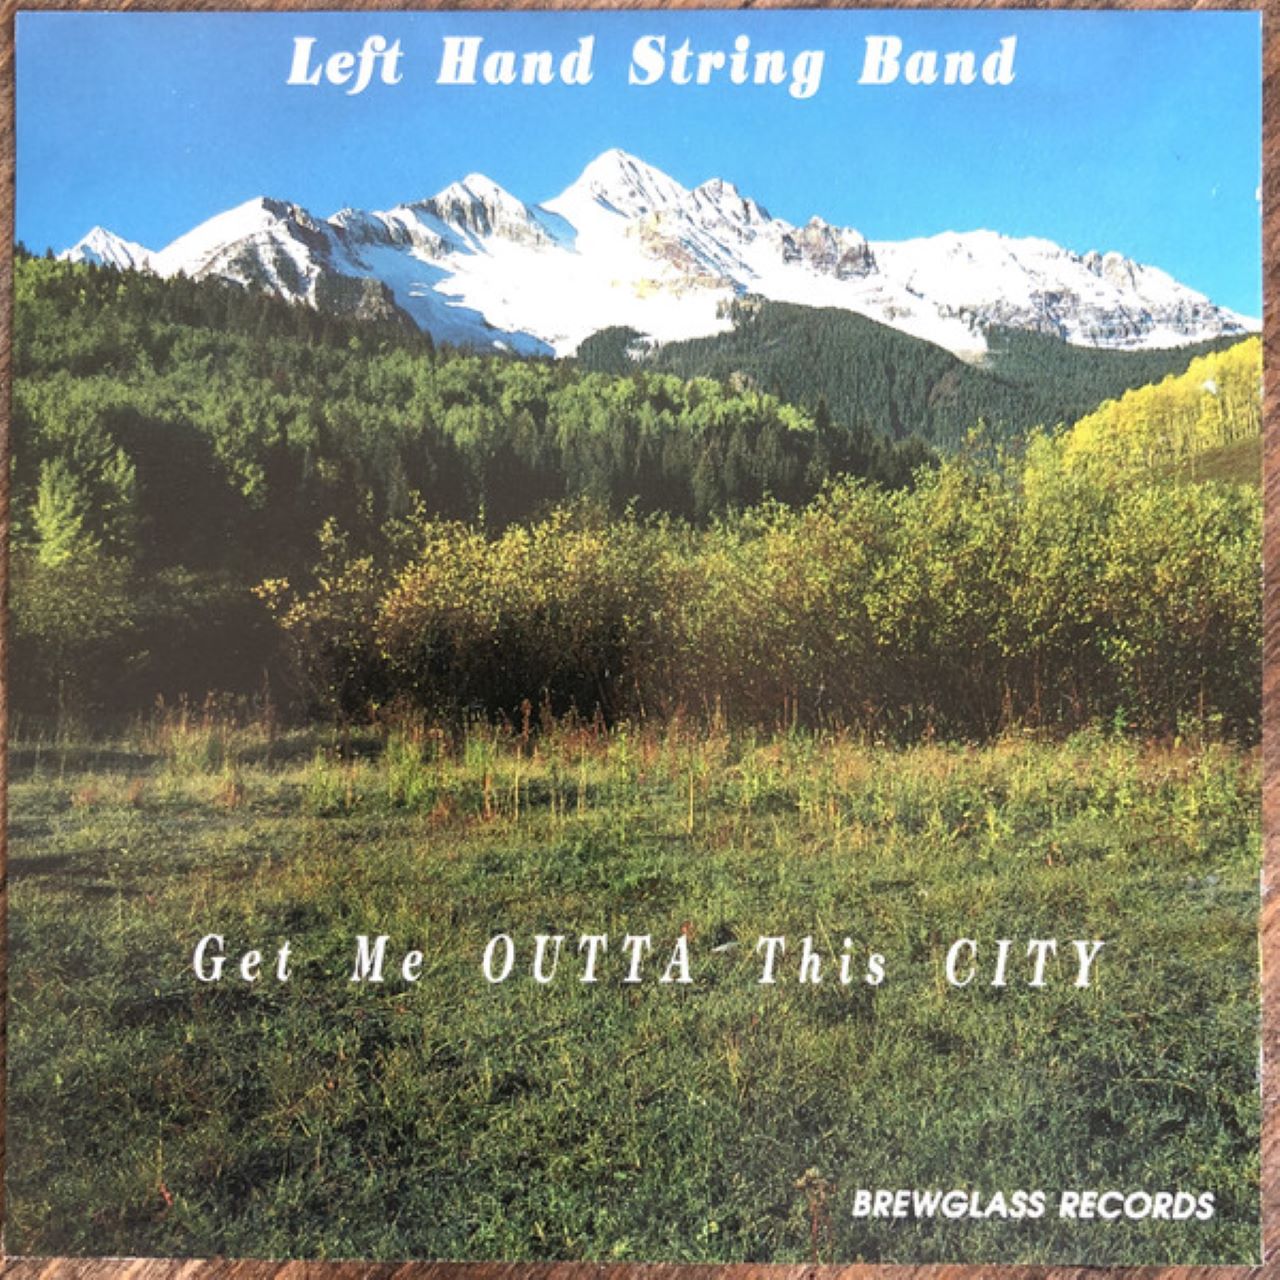 Left Hand String Band - Get Me Outta This City cover album